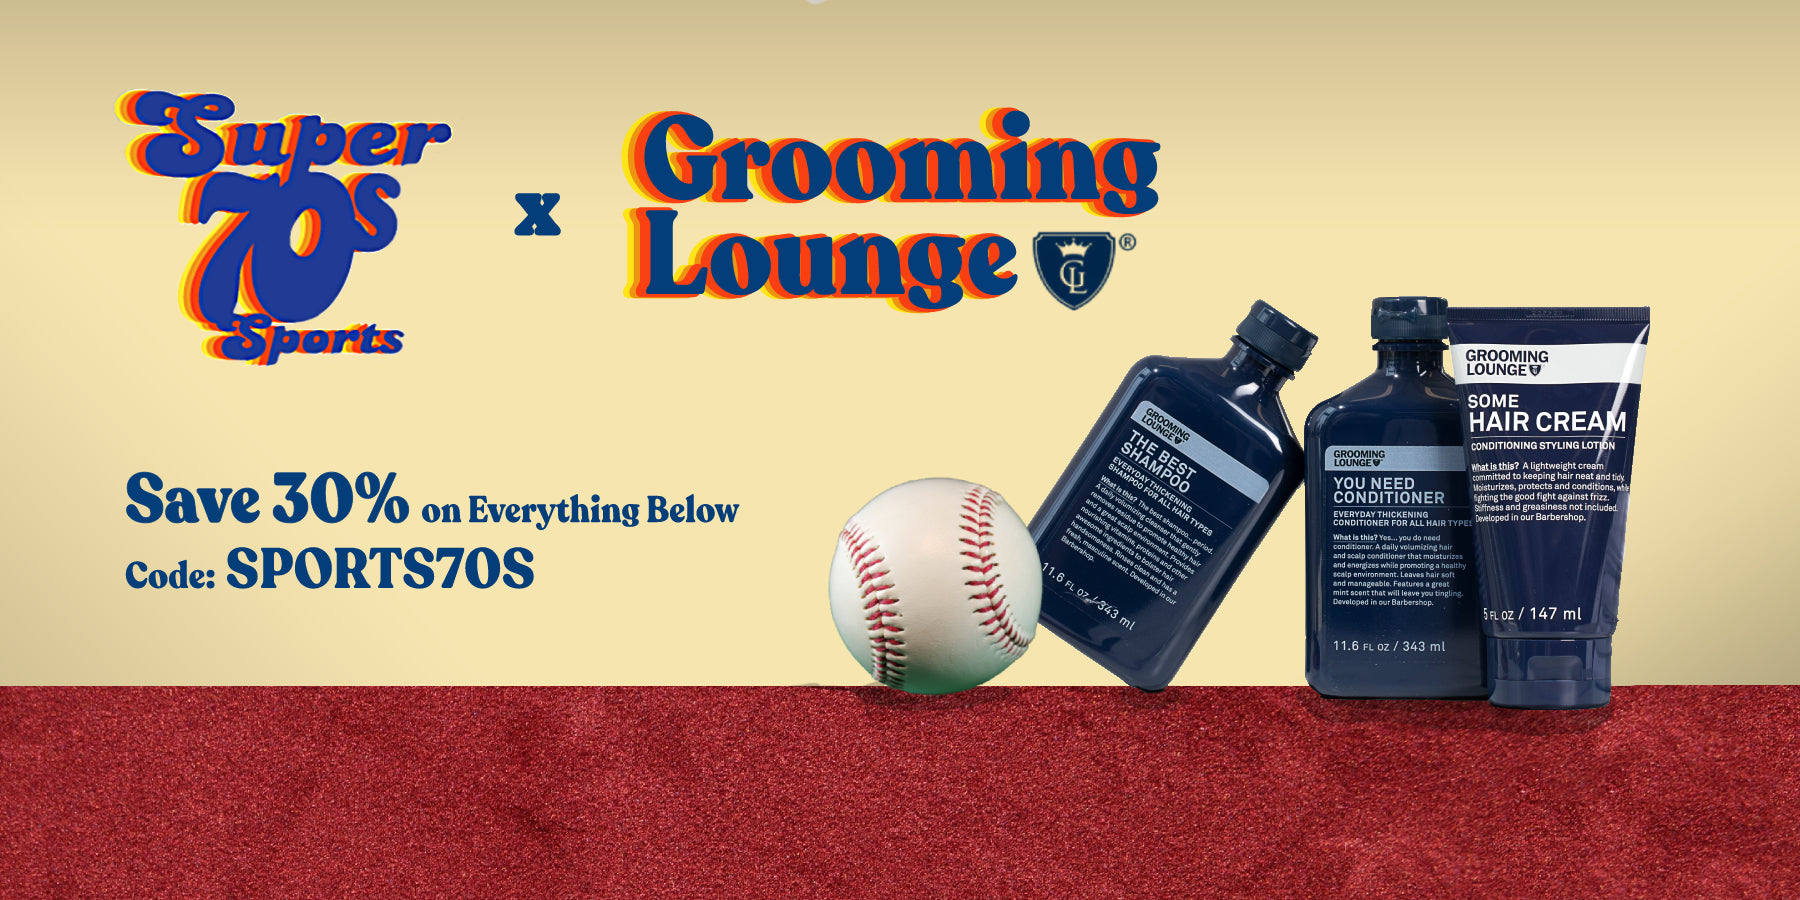 Super 70s + Grooming Lounge 30% Offer